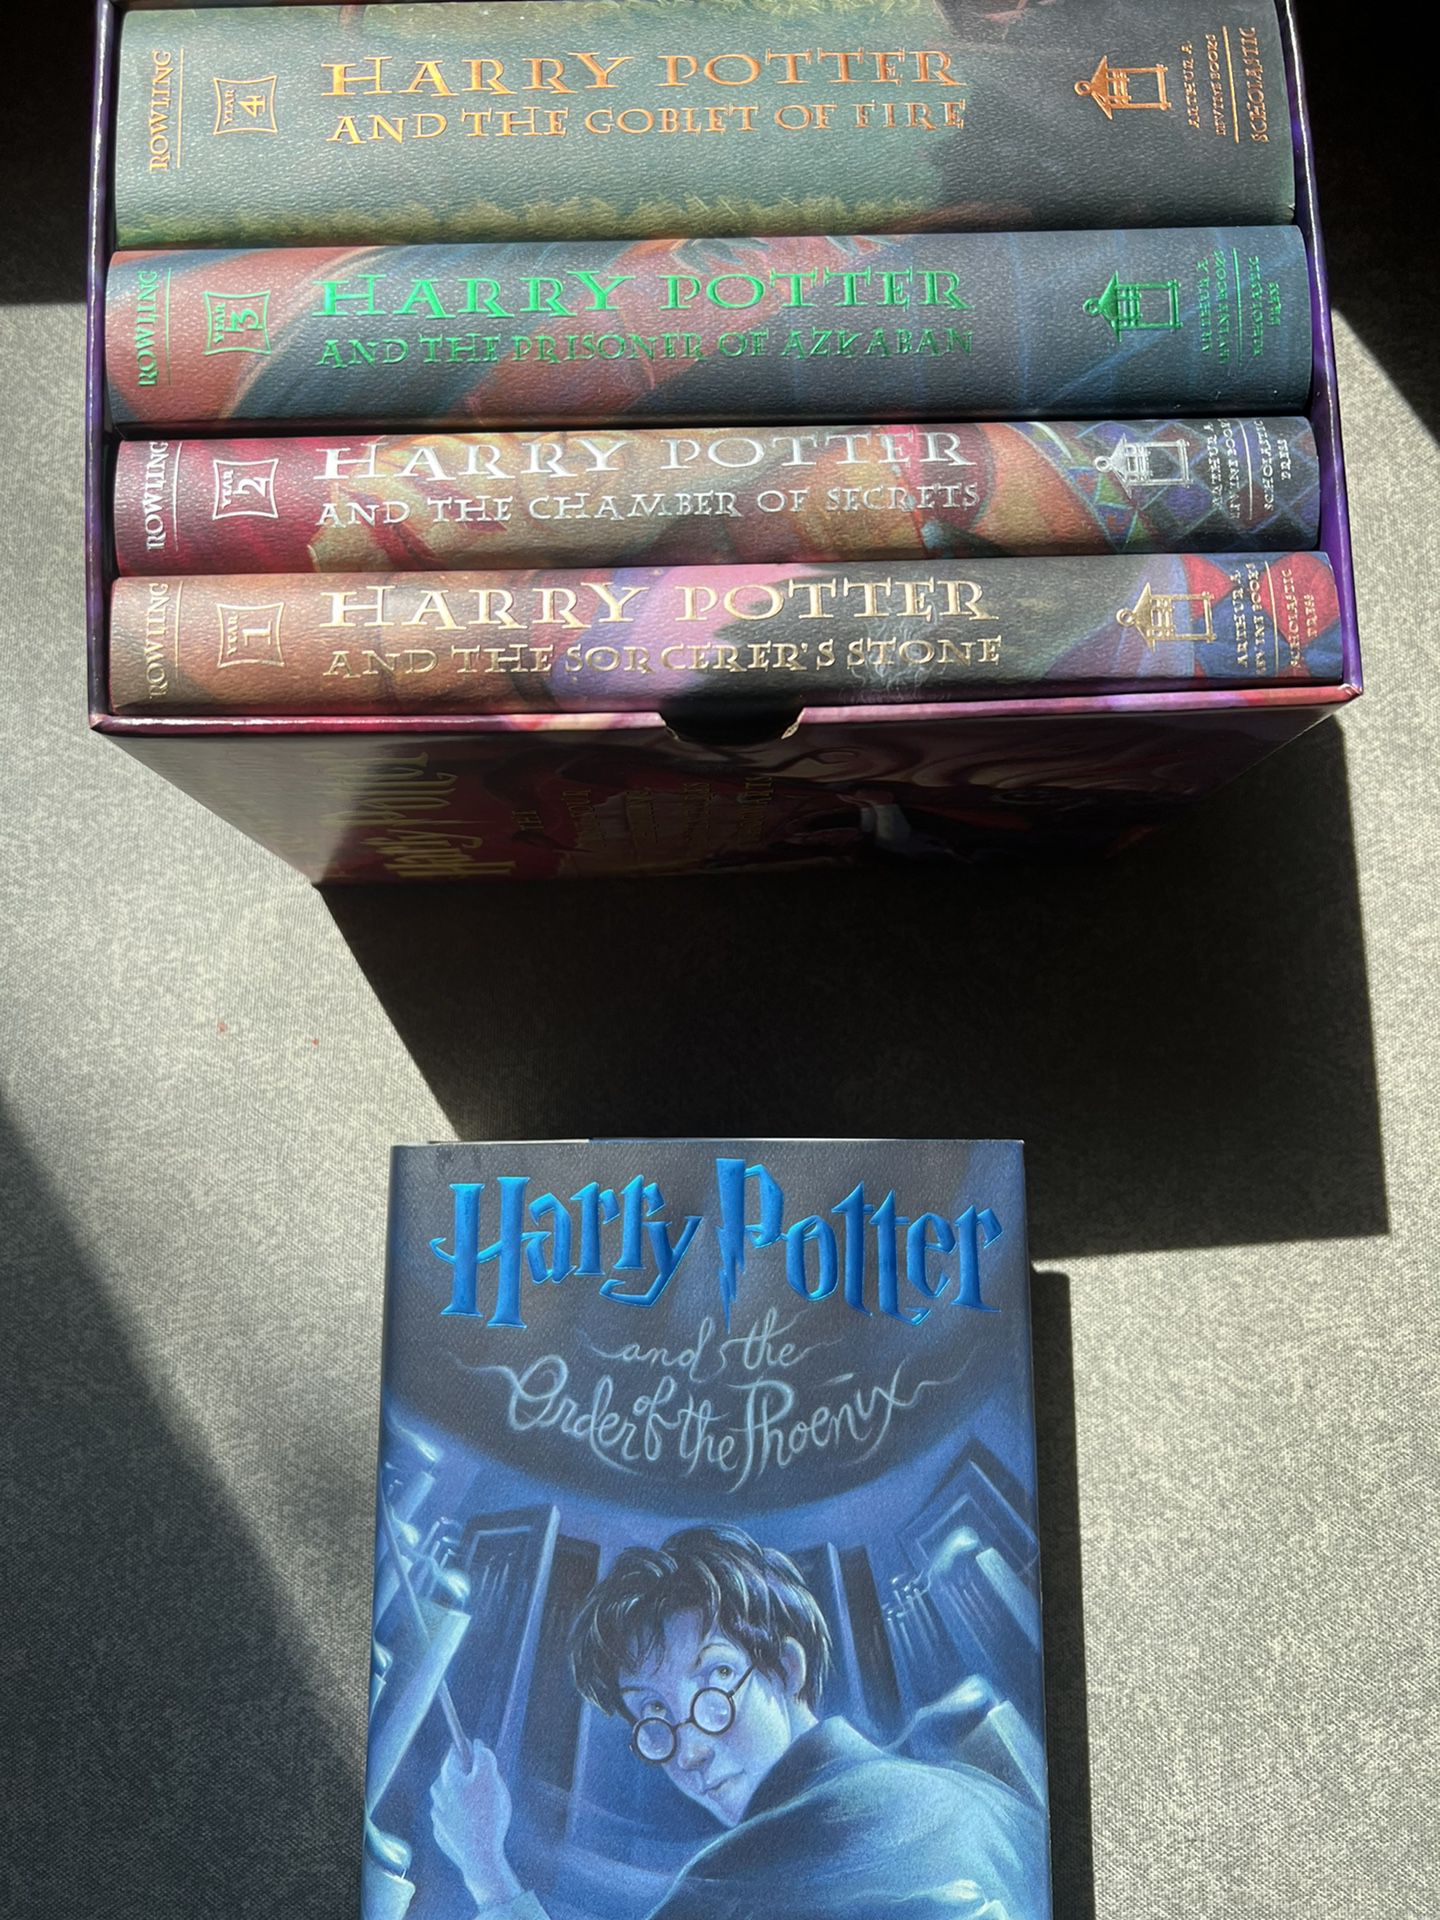 *LIMITED EDITION* *HARD COVER* - Harry Potter Books 1-5